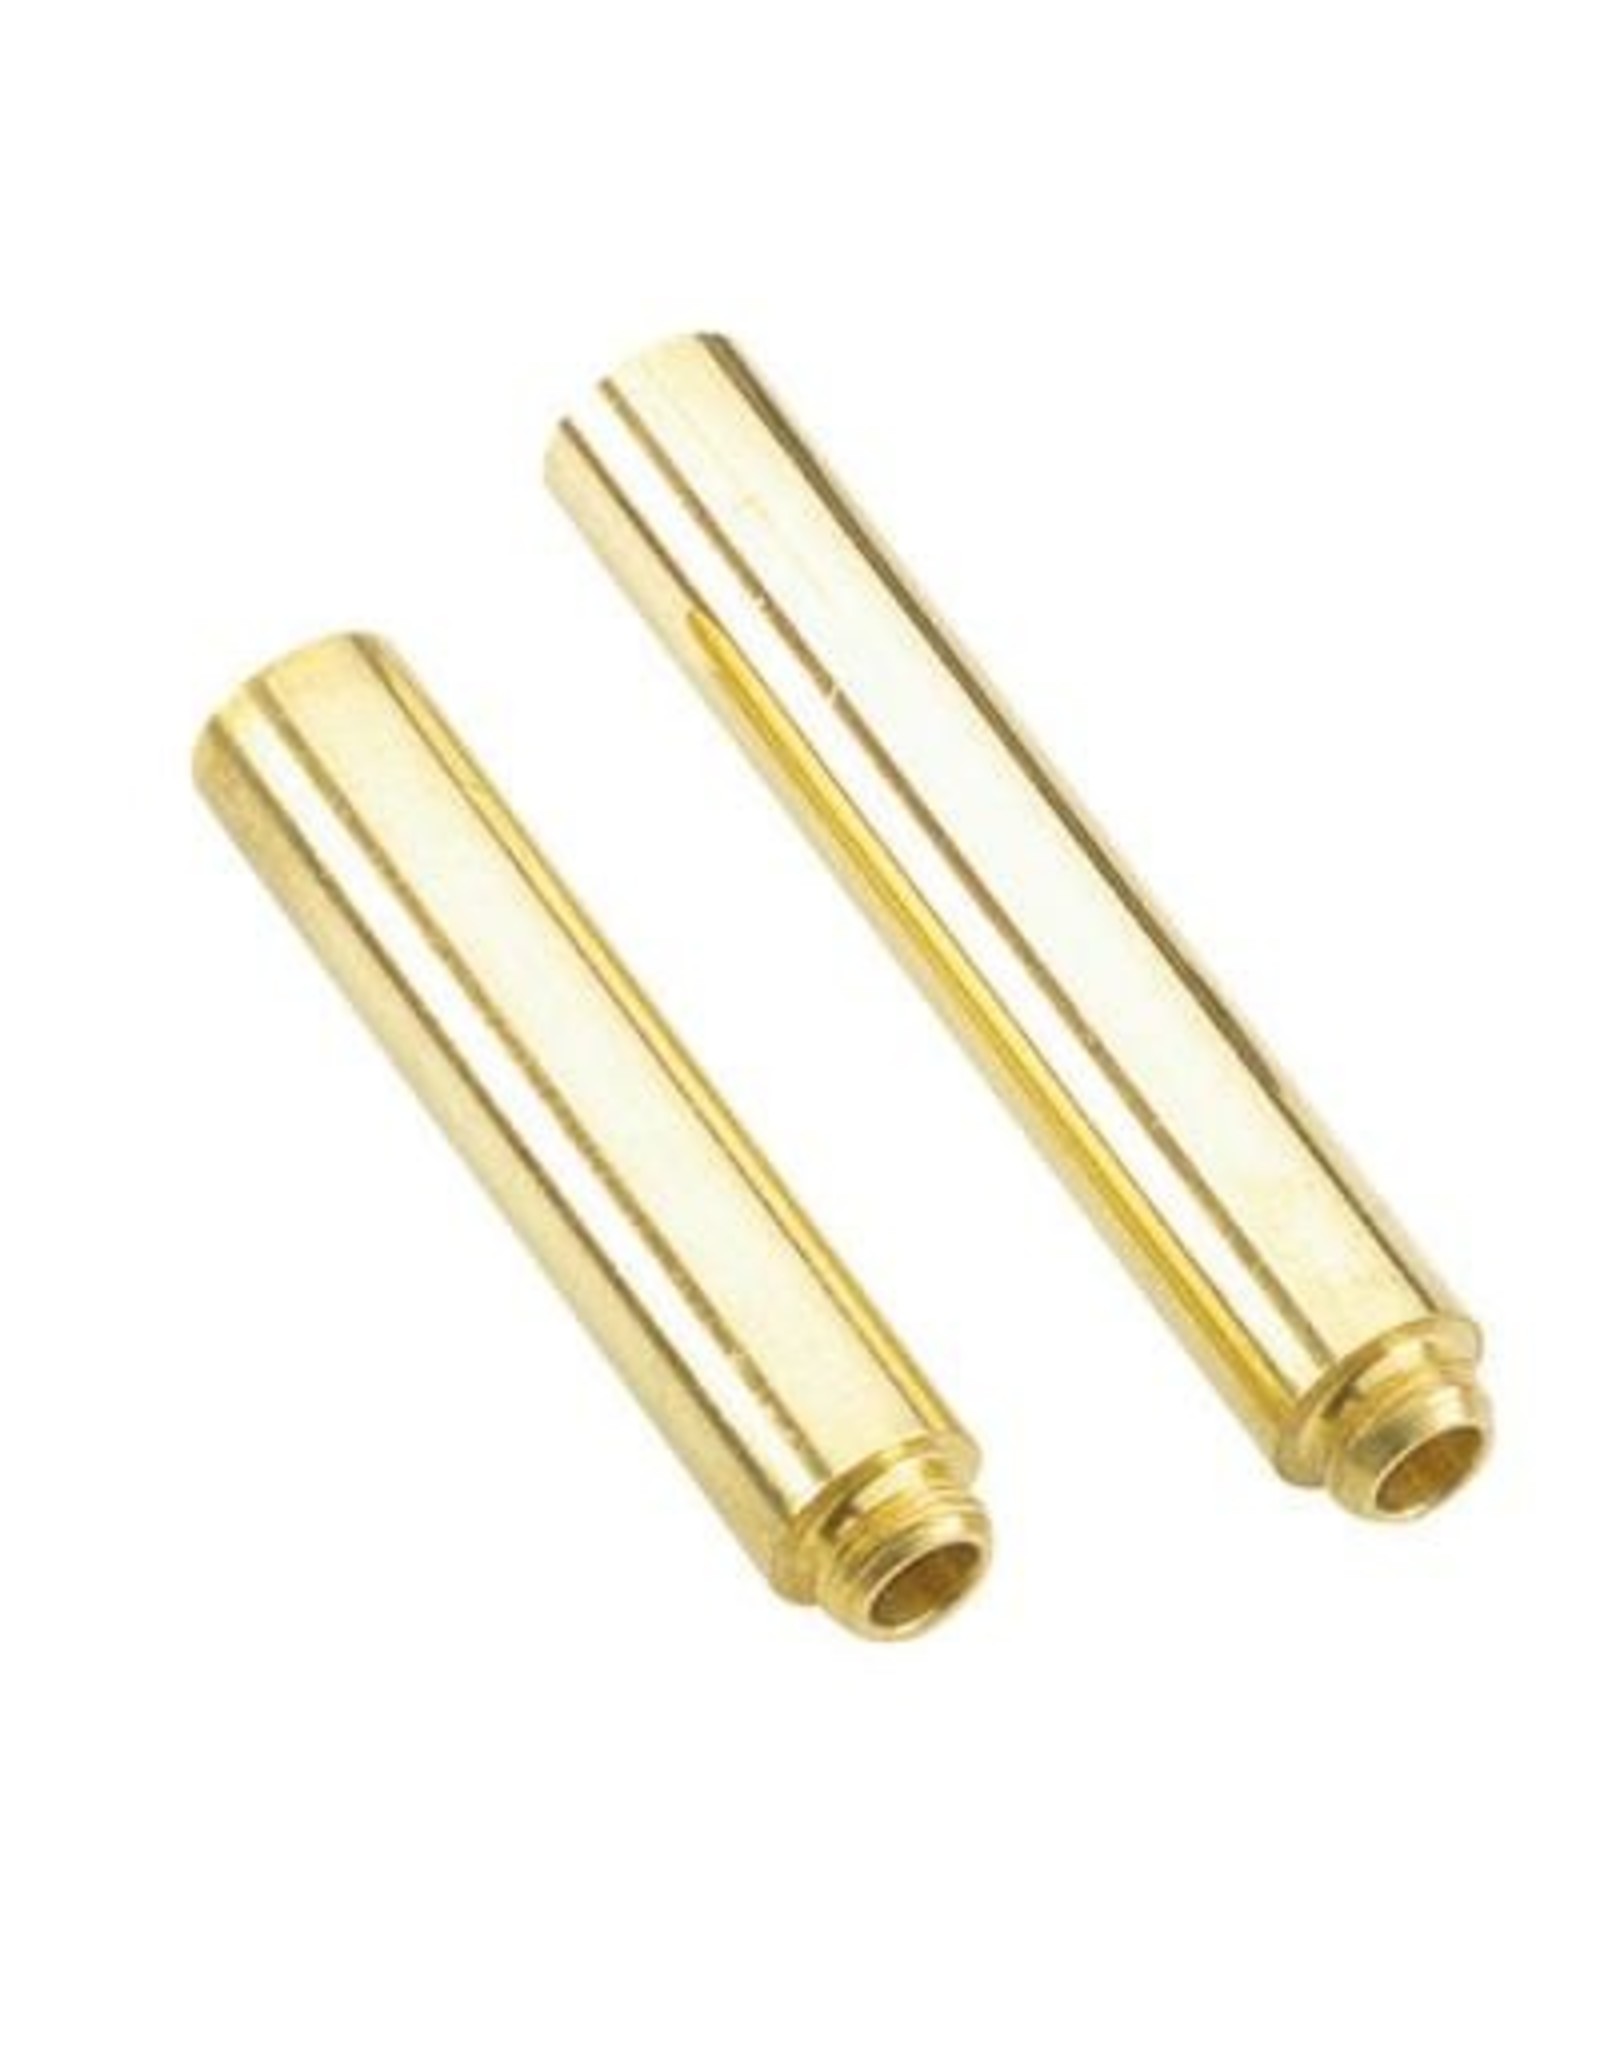 Traditions Traditions Brass Spout Set 75 or 100 Gr